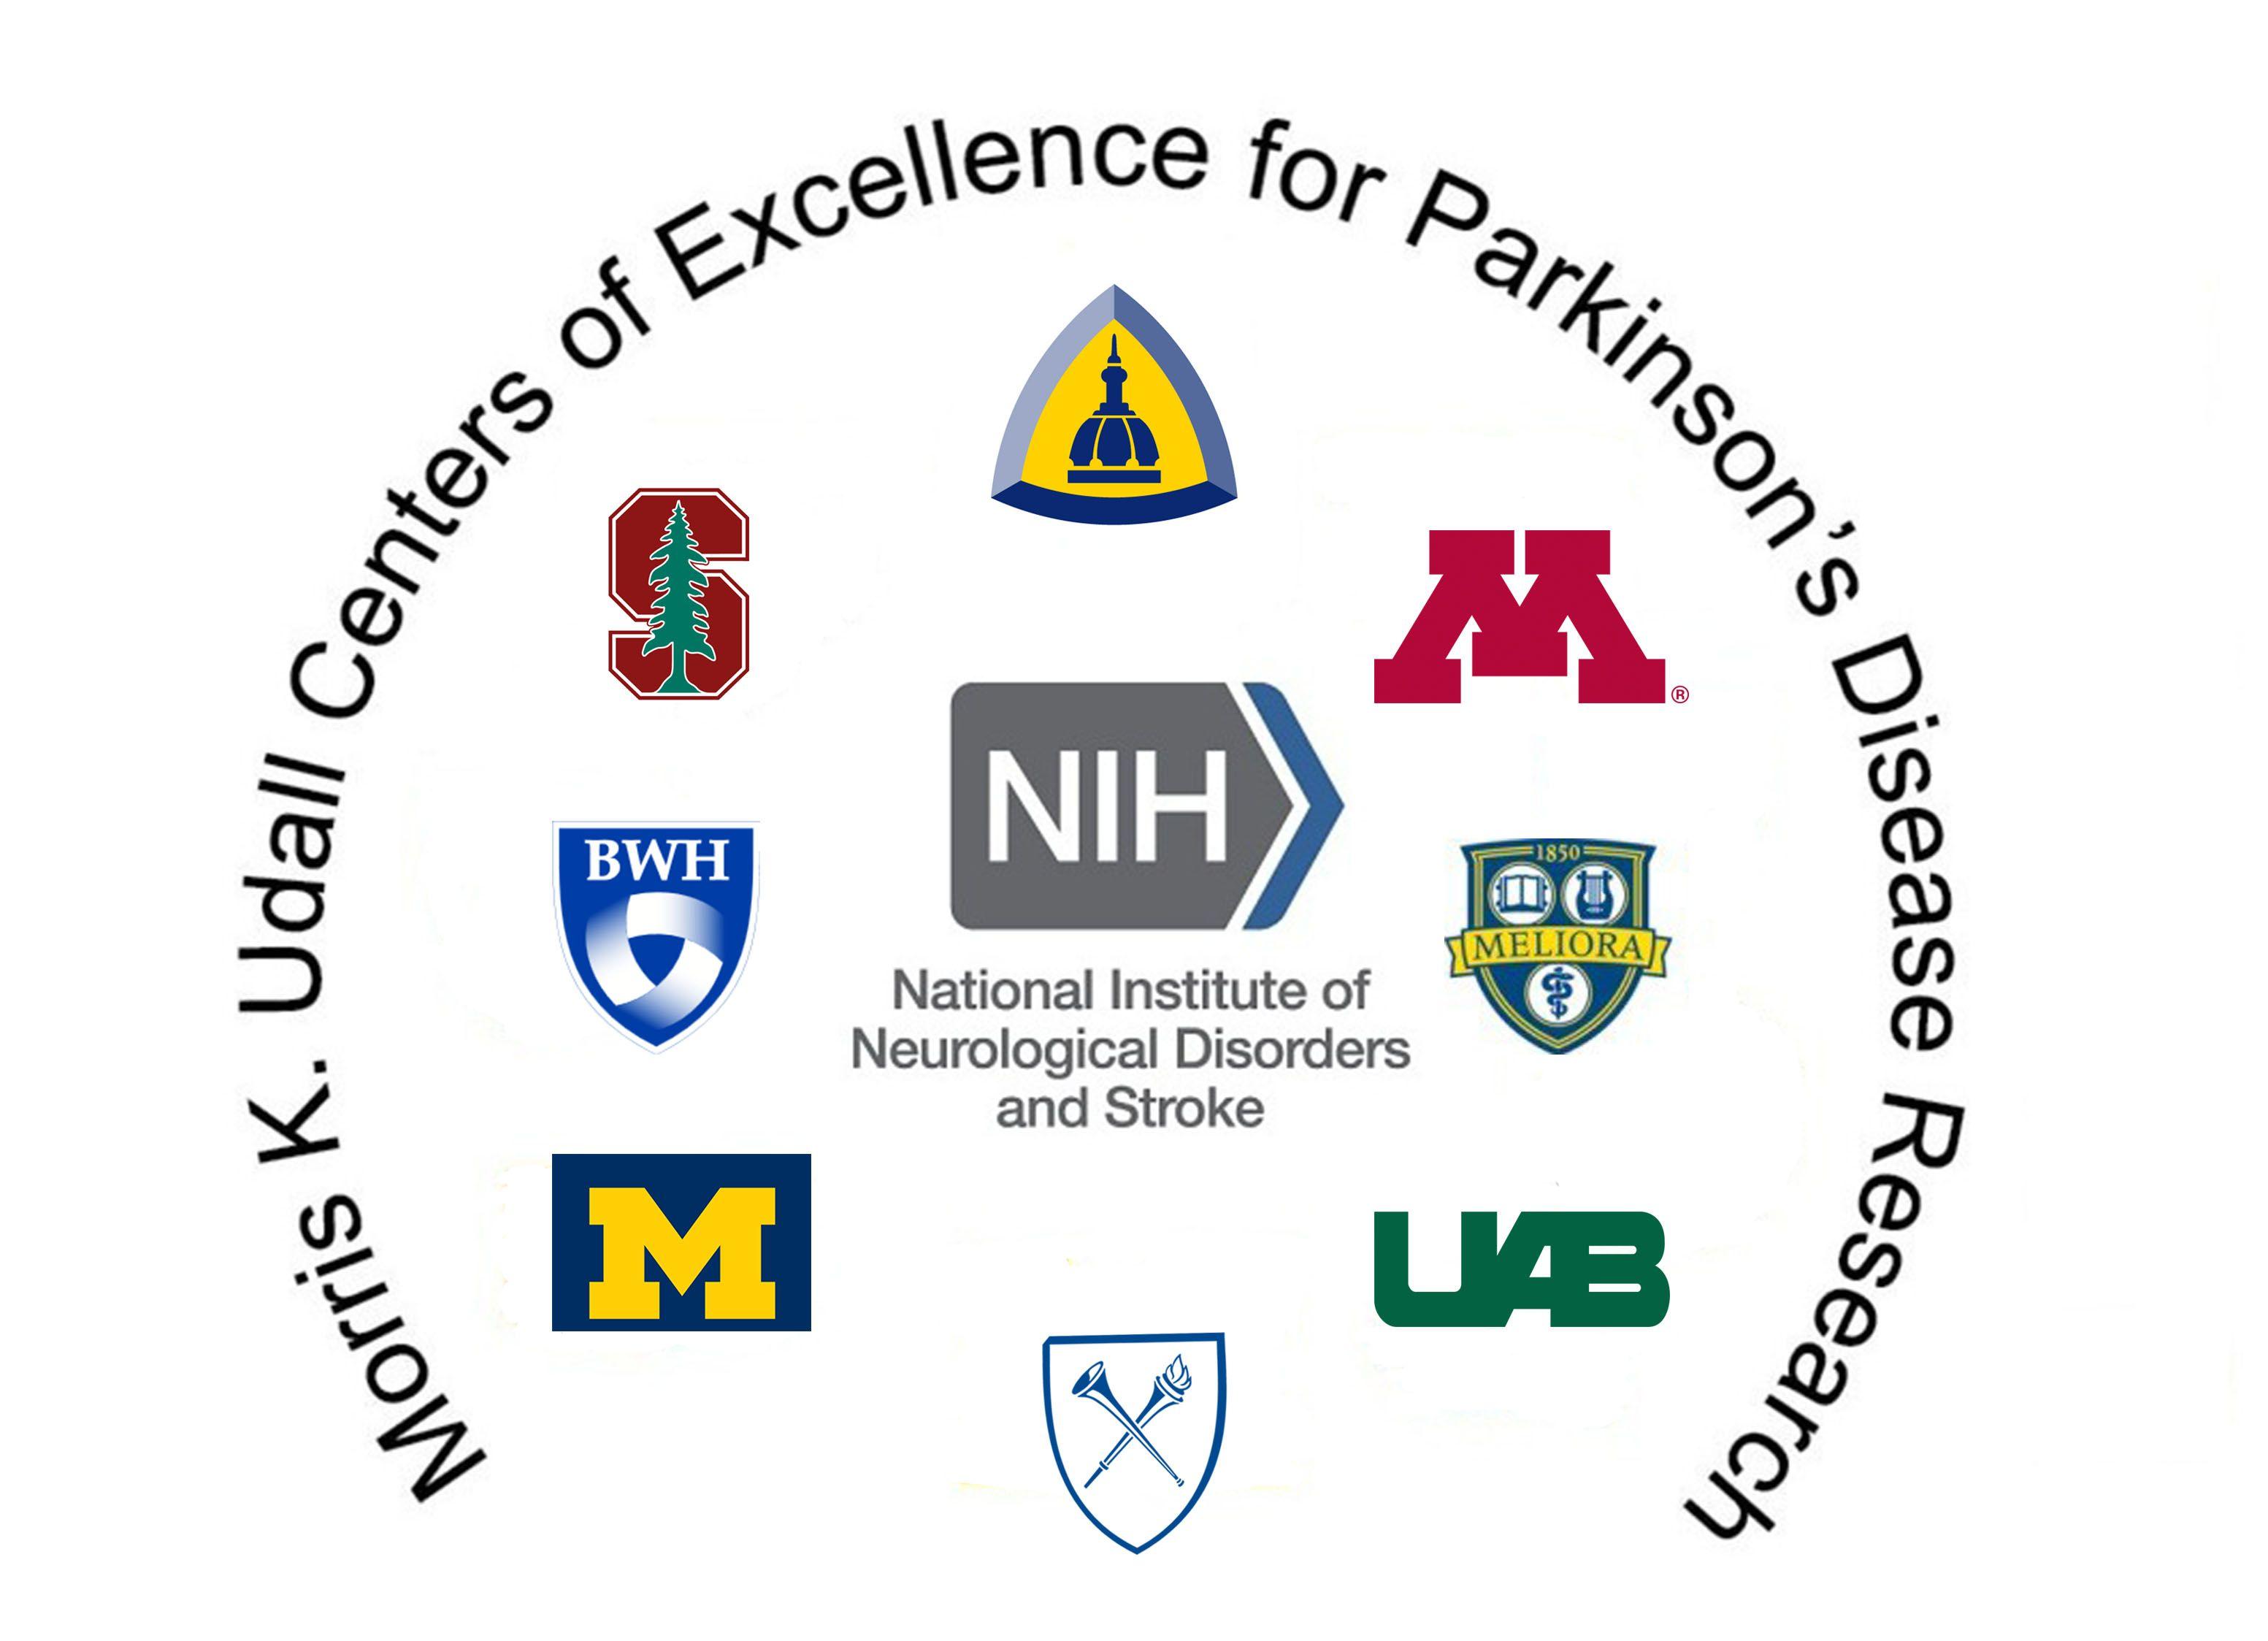 Disease Logo - Parkinson's Disease Centers of Excellence | National Institute of ...